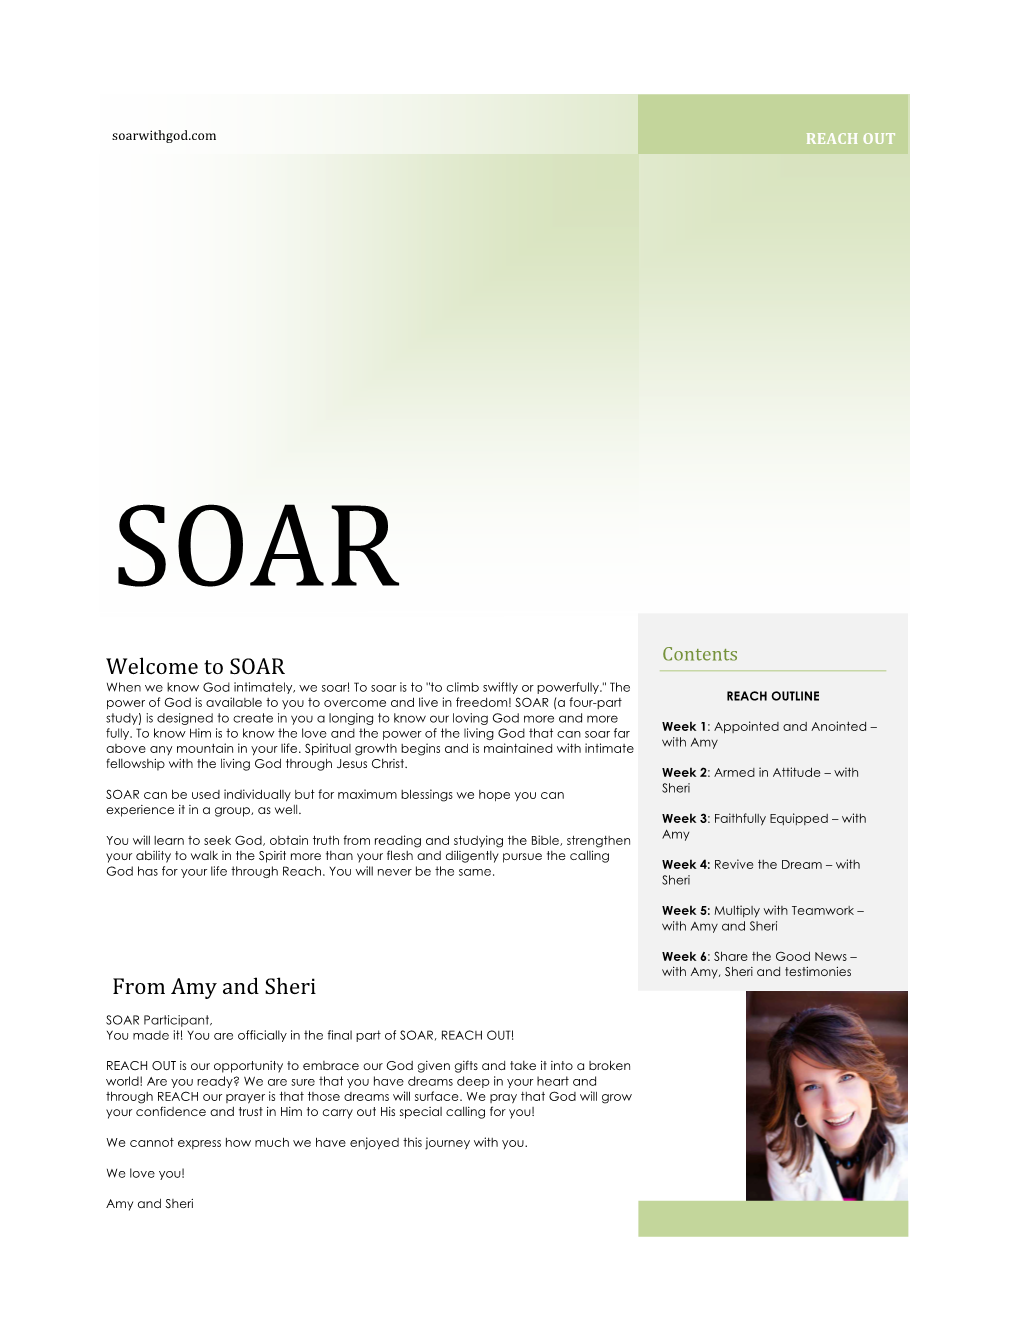 From Amy and Sheri Welcome to SOAR